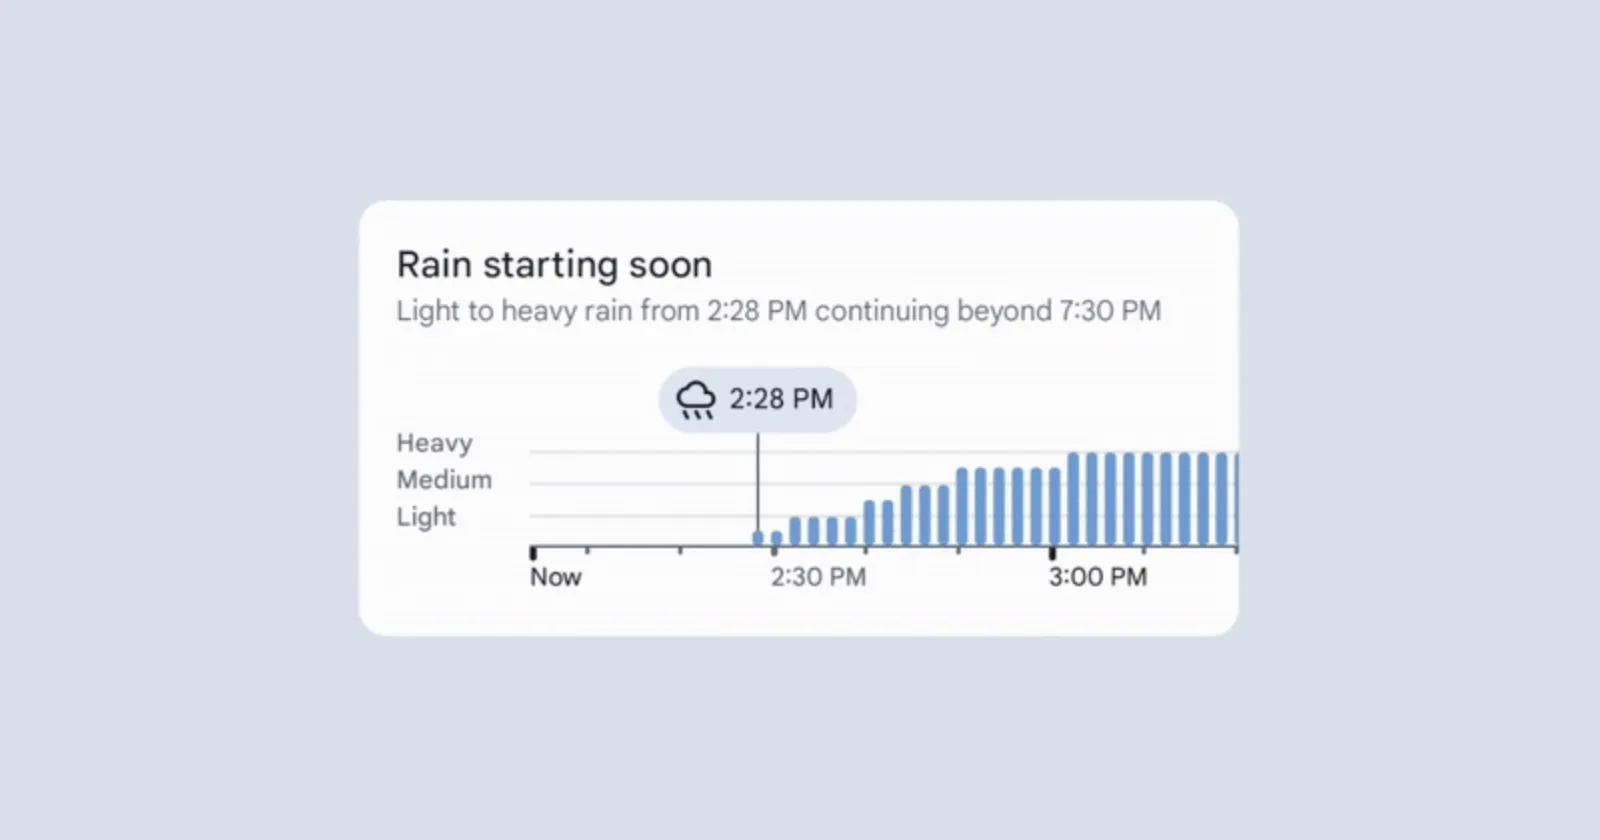 Google Pixel Weather app & Search integrate MetNet-3 for enhanced 12-hour precipitation forecasts